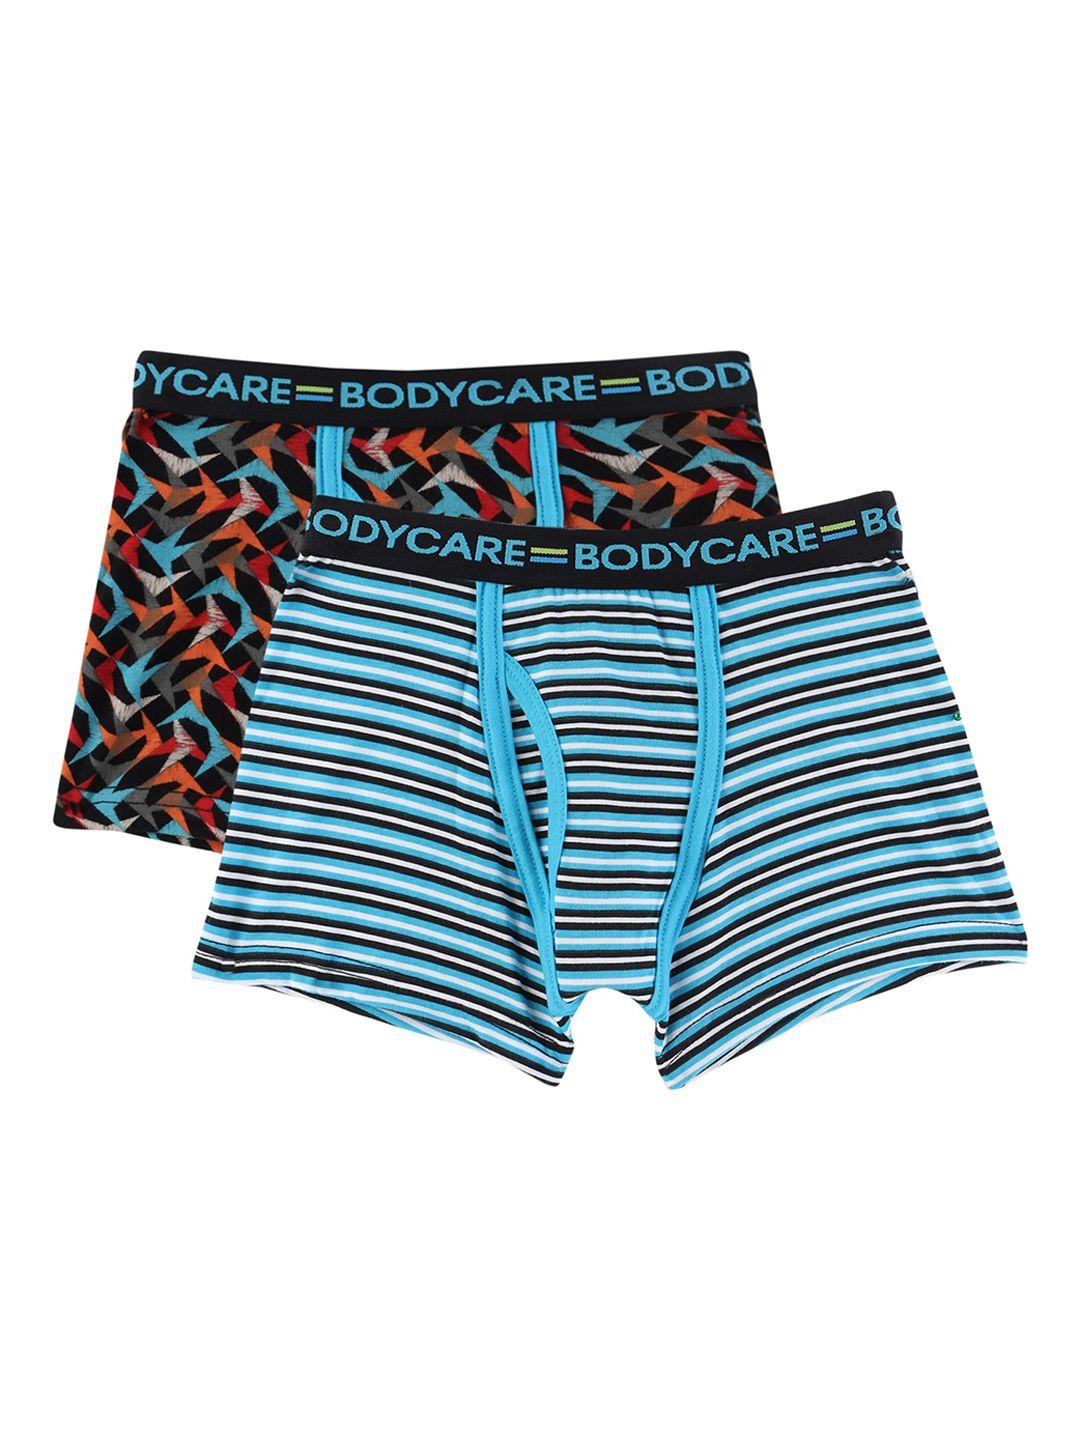 bodycare-kids-boys-pack-of-2-blue-and-orange-printed-cotton-trunk-kga2062bsb-pk004